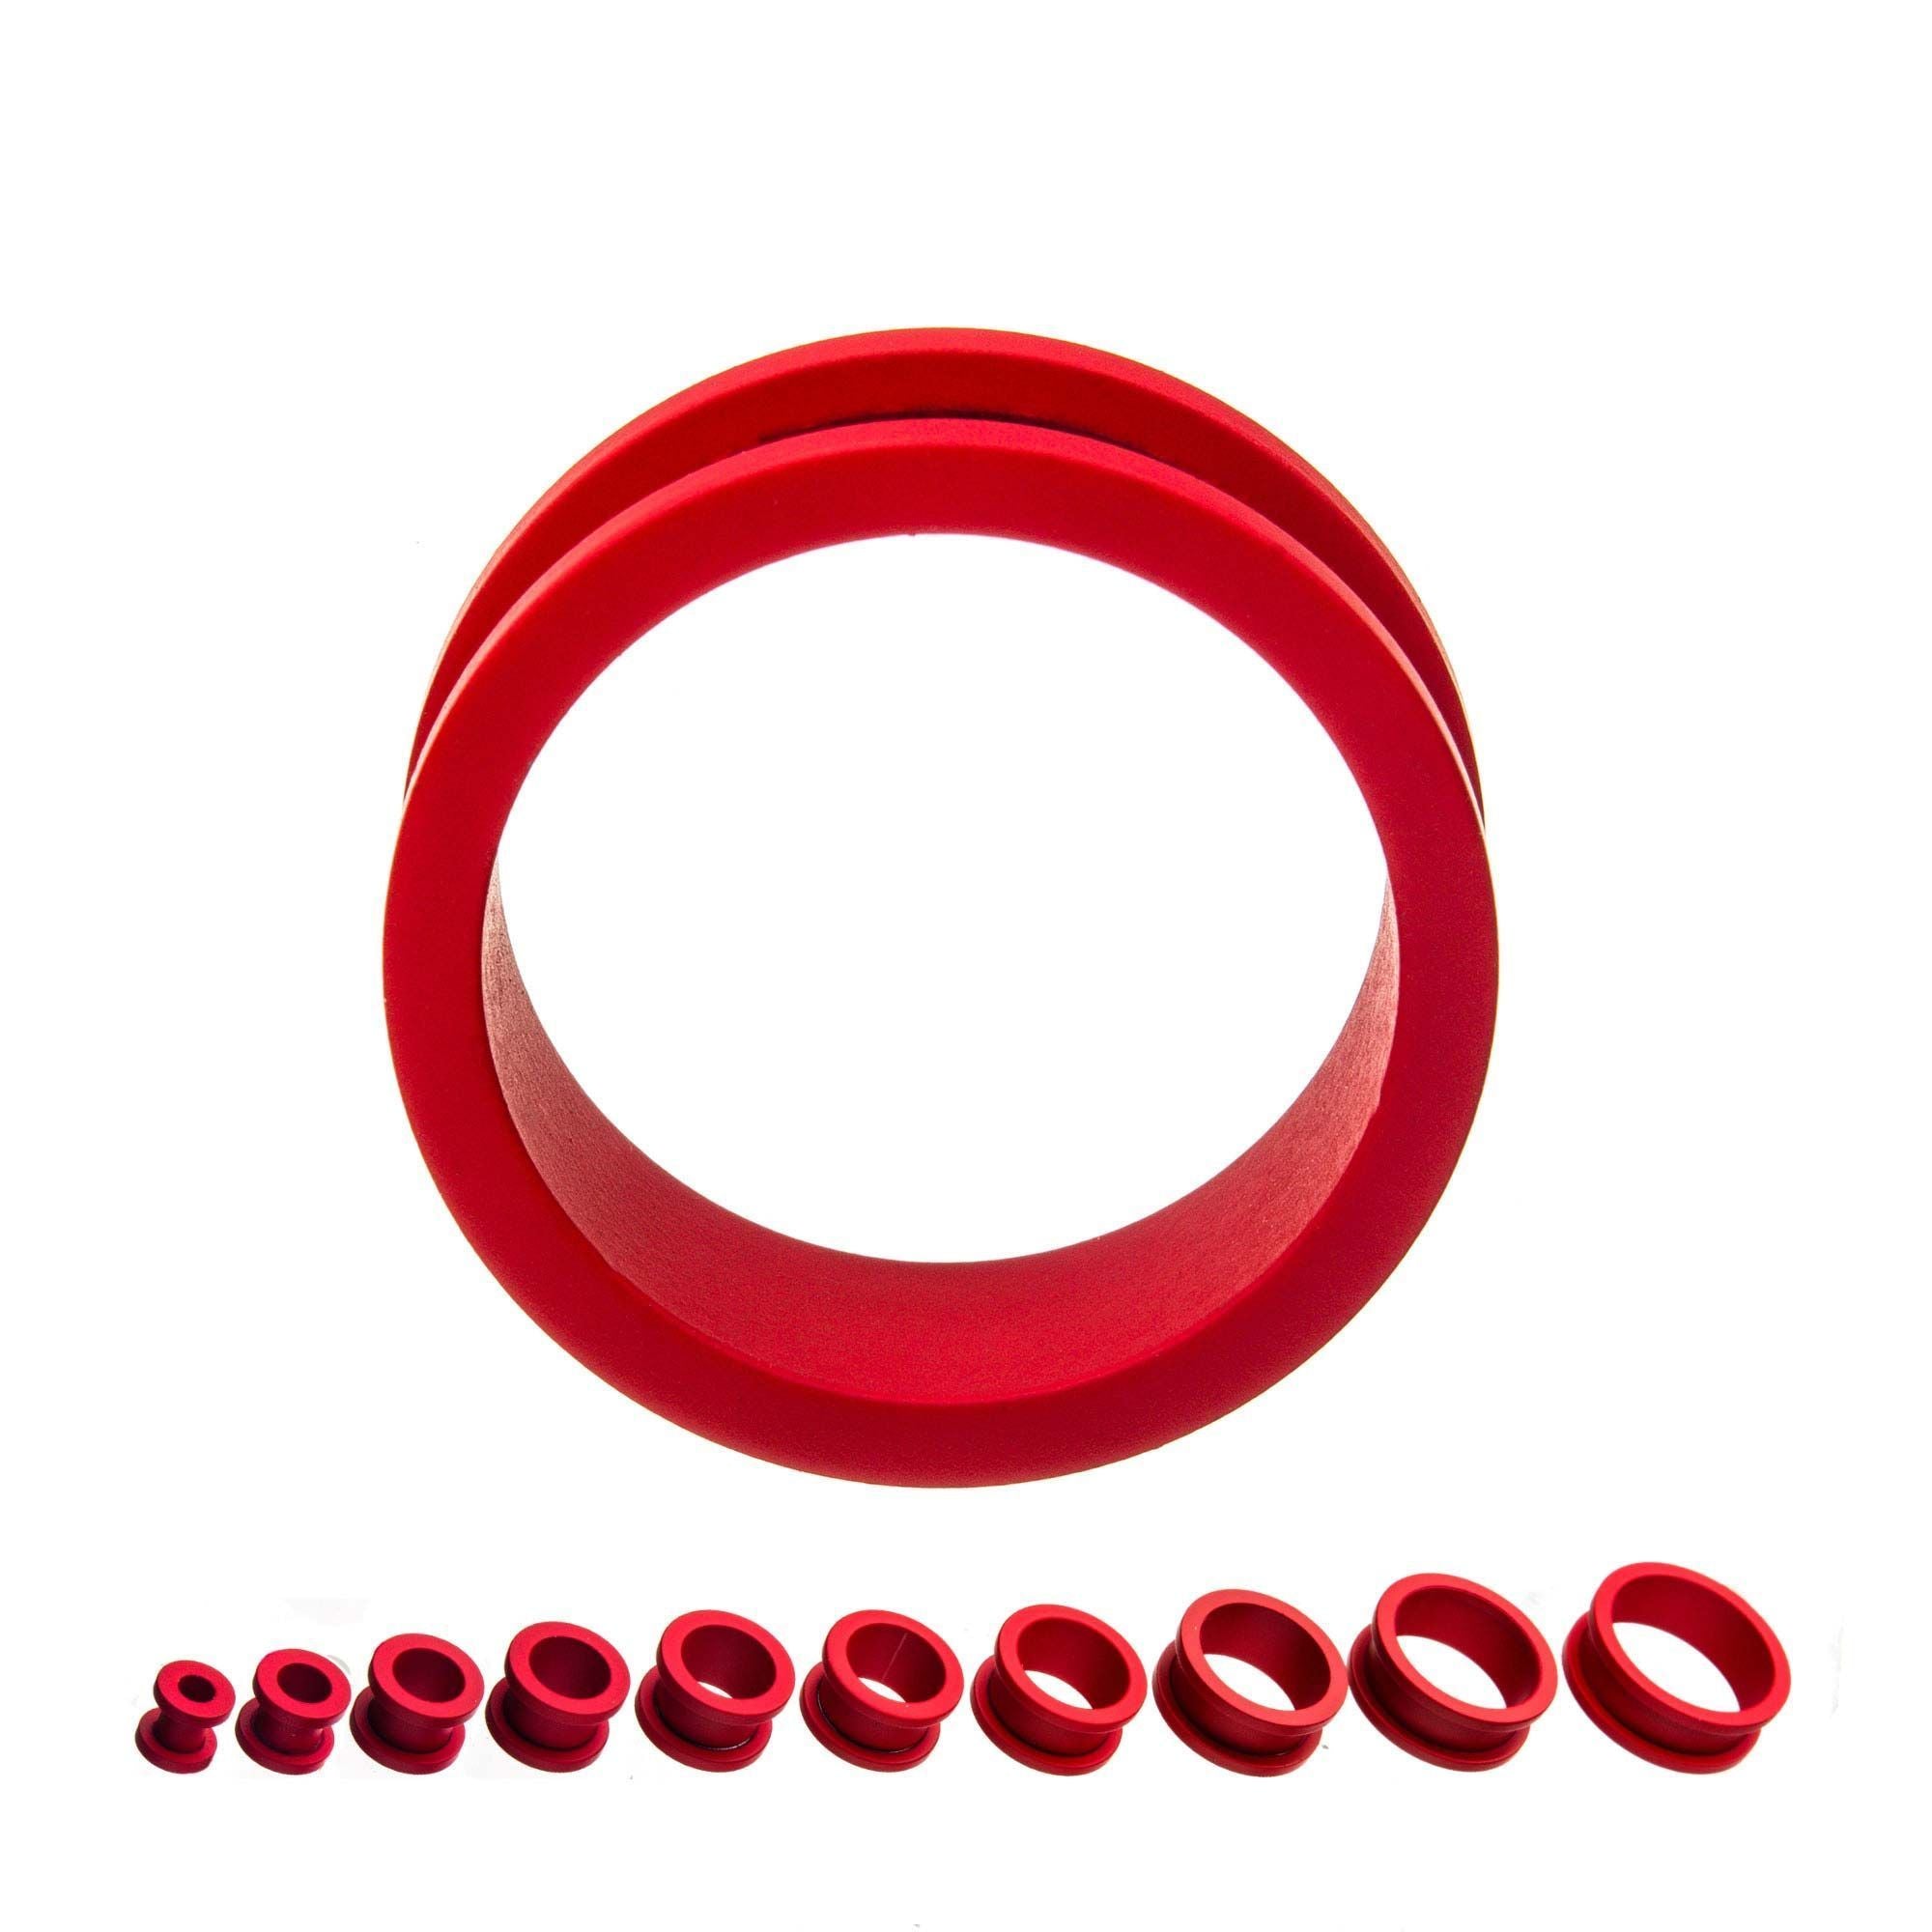 Crimson Red Silicone Coated Screw Fit Tunnel Plugs - 1 Pair  sbvpsrpdr